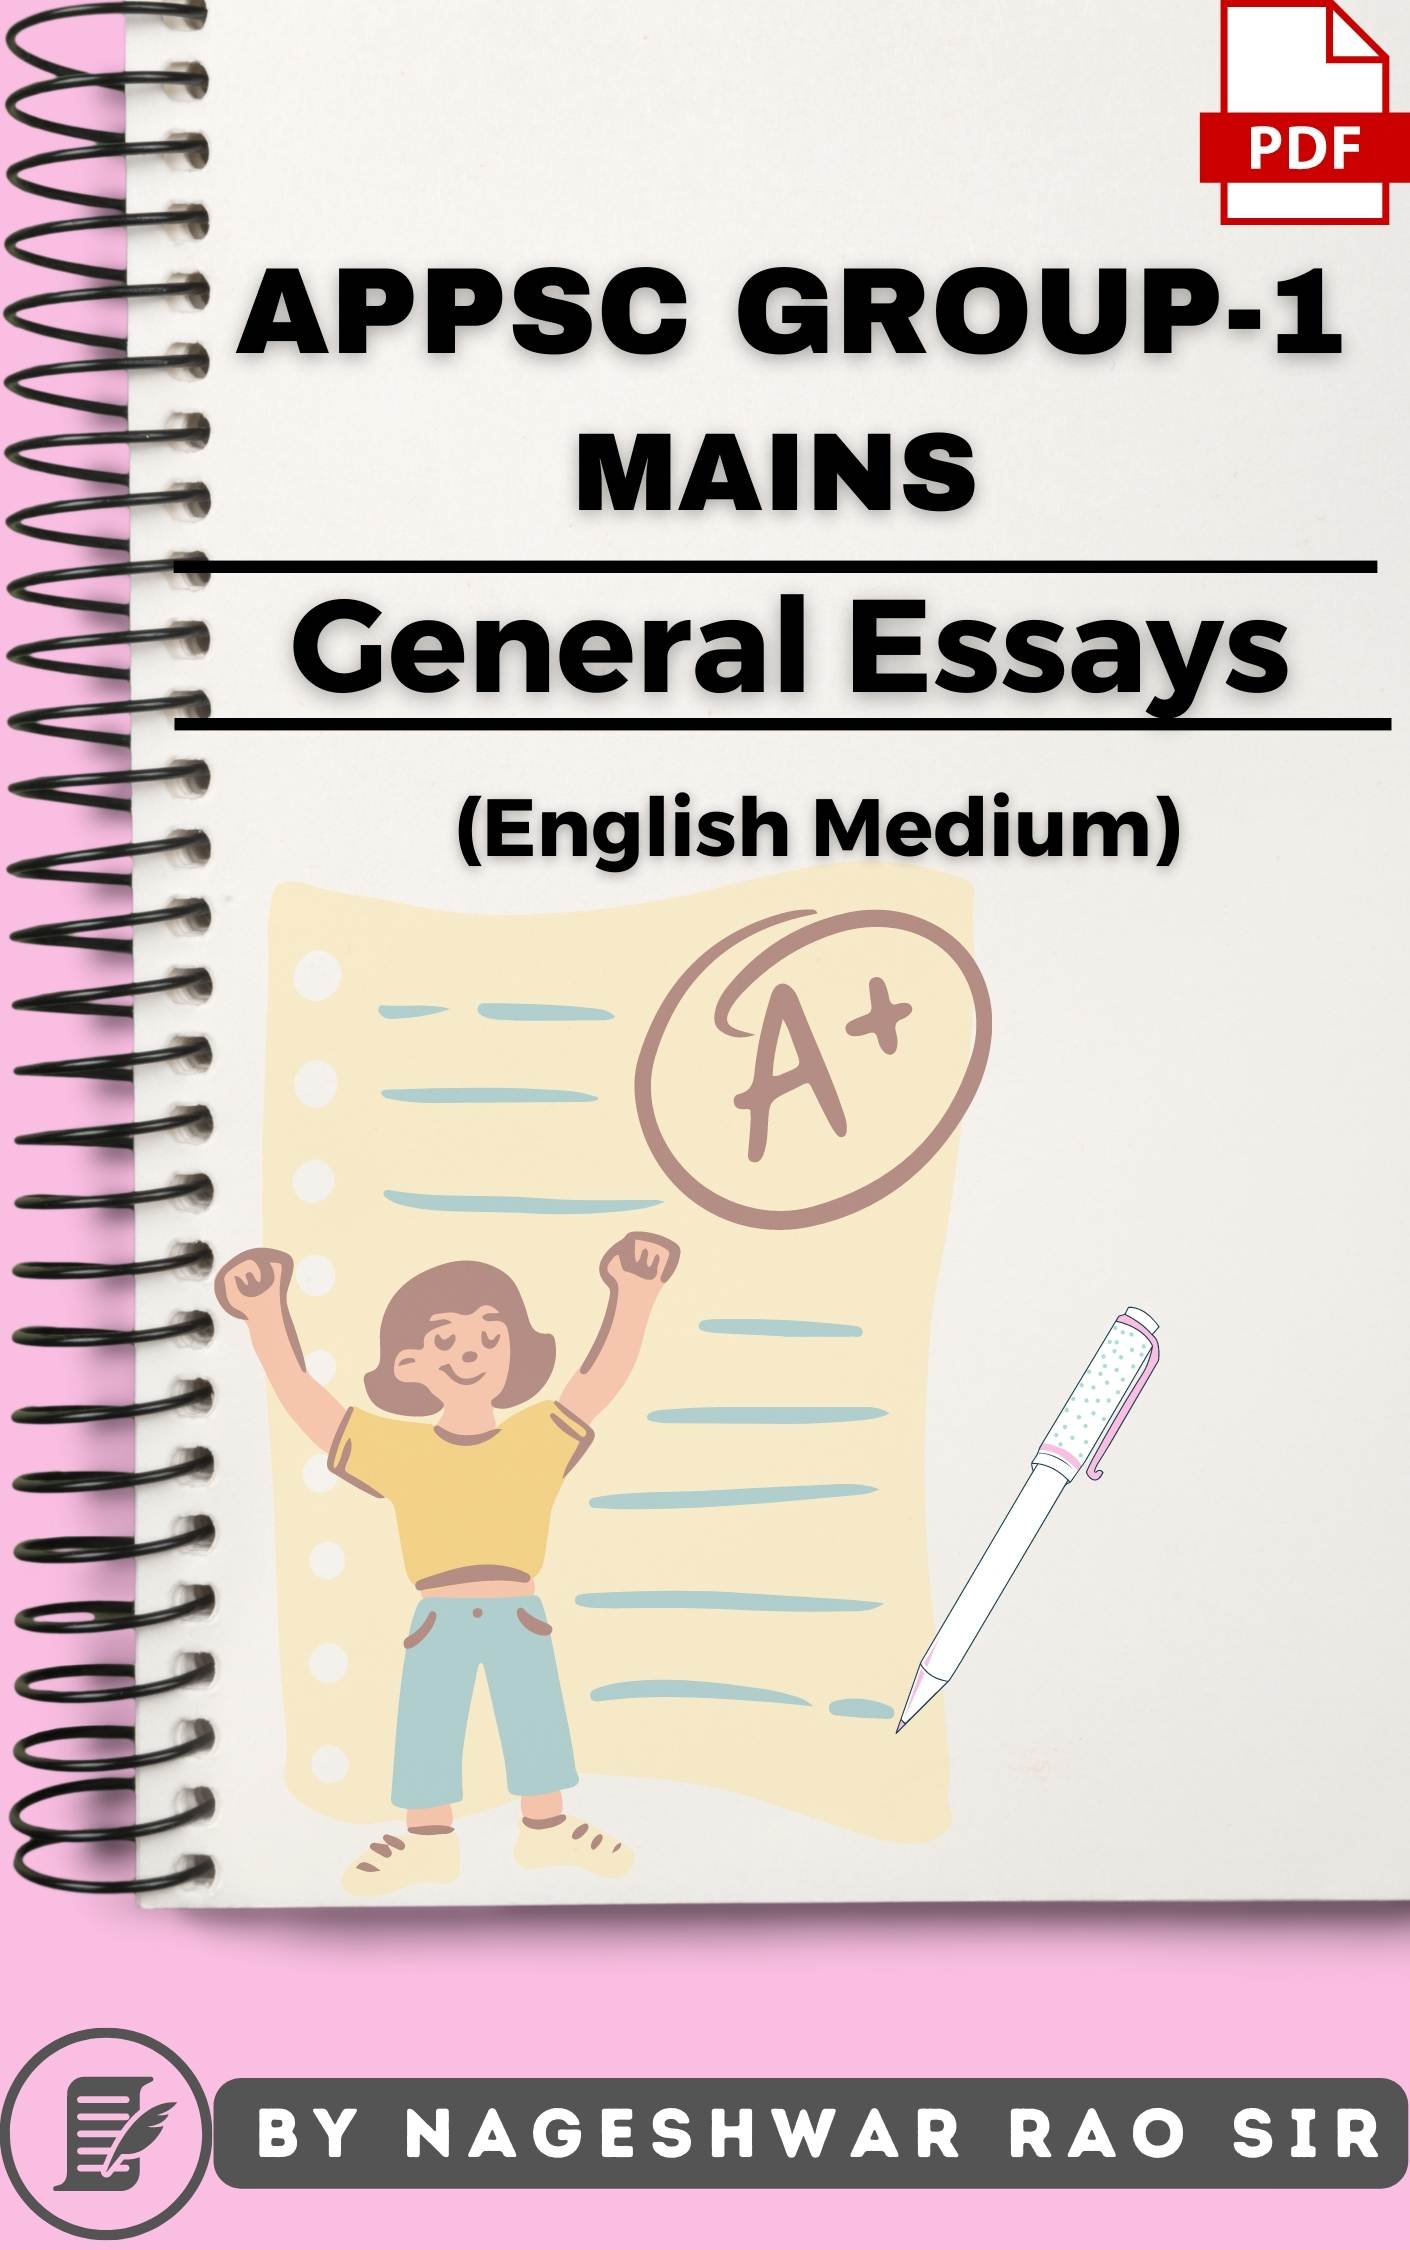 APPSC Group-1 Mains General Essays by Nageshwar Rao (Handwritten Class Notes- English Medium)